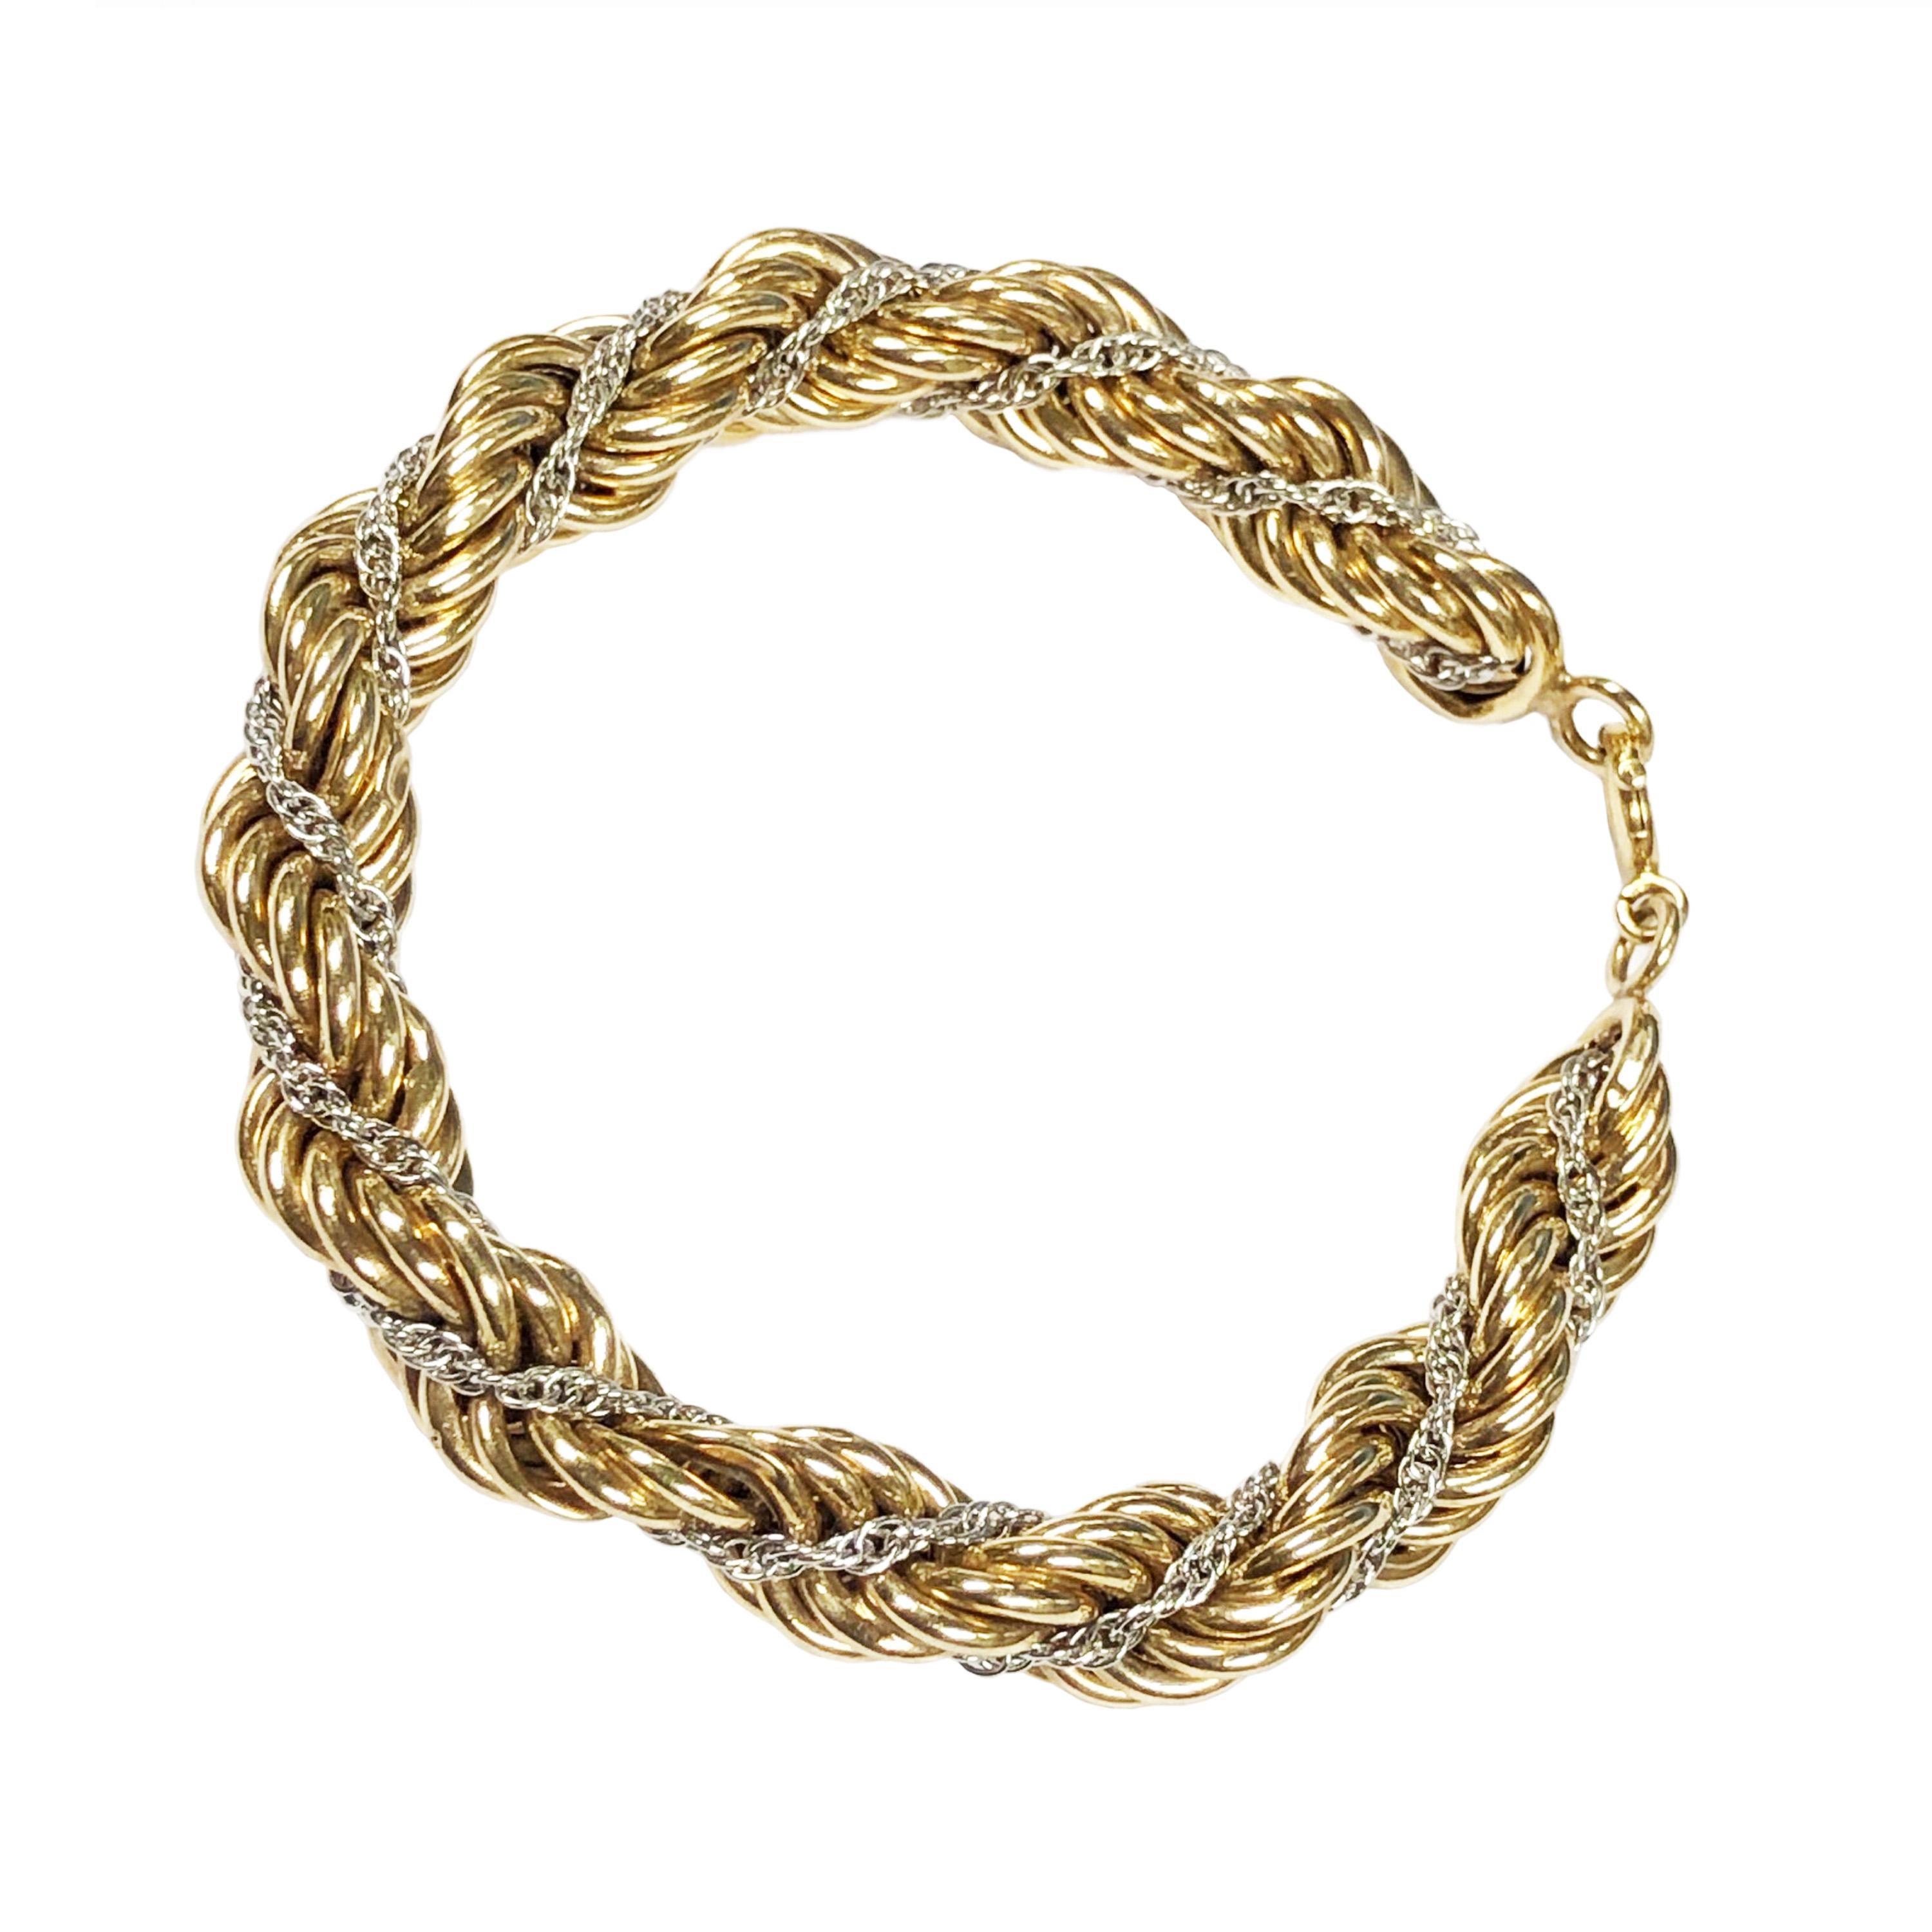 Circa 1980s Tiffany & Company 14K Yellow and White Gold Rope Bracelet comprised of a White gold chain interwoven in the larger Yellow Gold Bracelet, measuring 8 inches in length 3/8 inch wide and weighing 29 Grams. Excellent condition and comes in